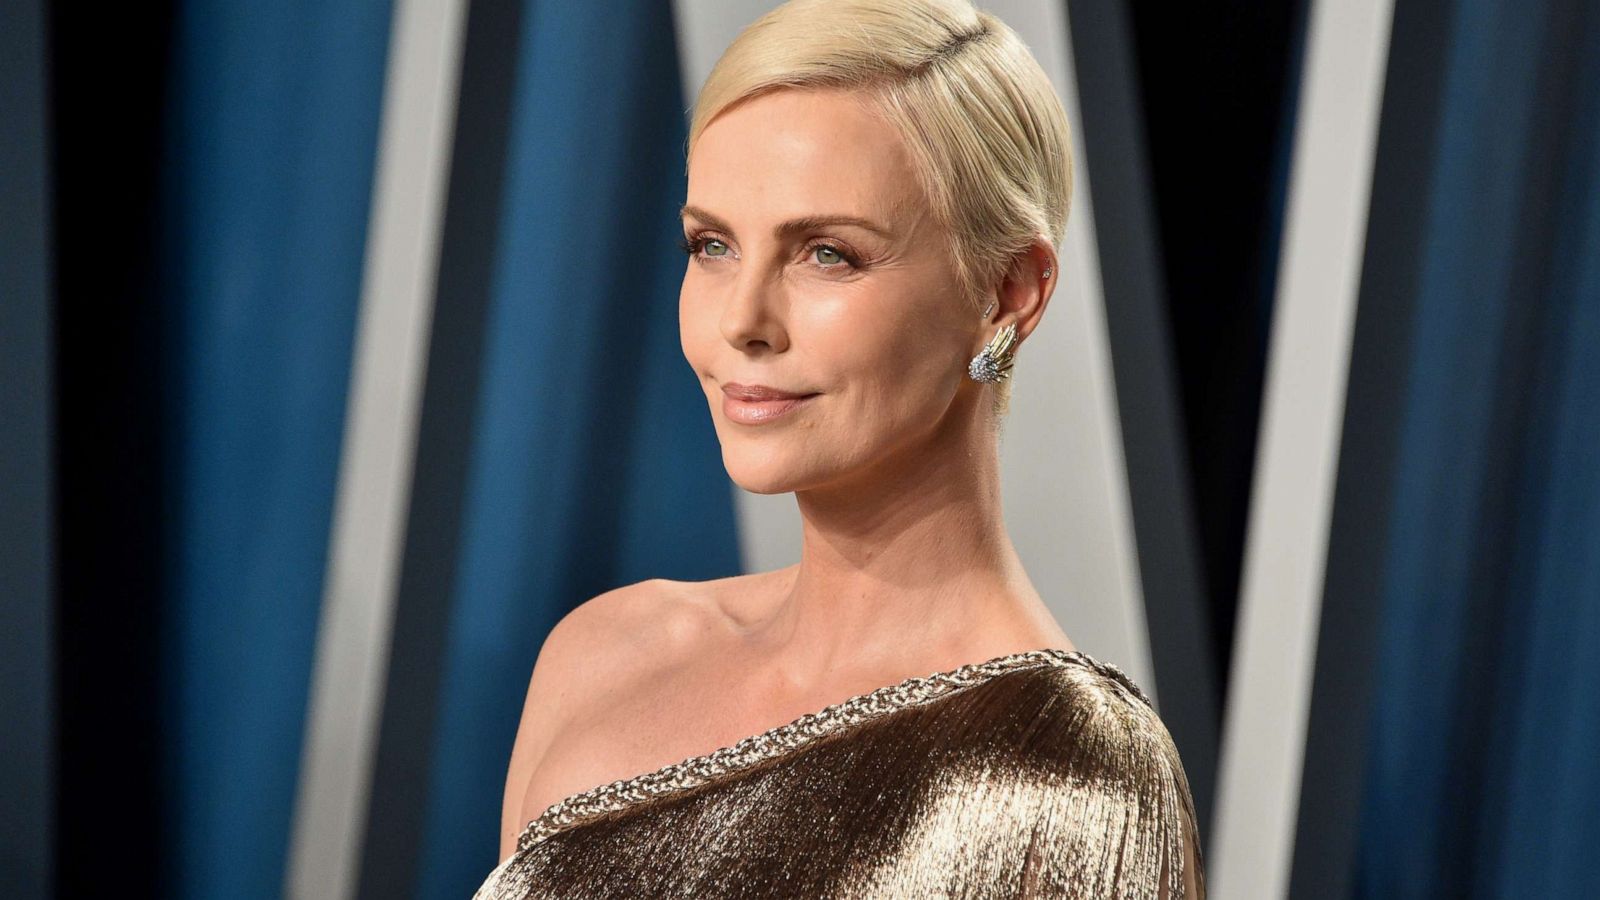 New Charlize Theron 2020 Wallpapers